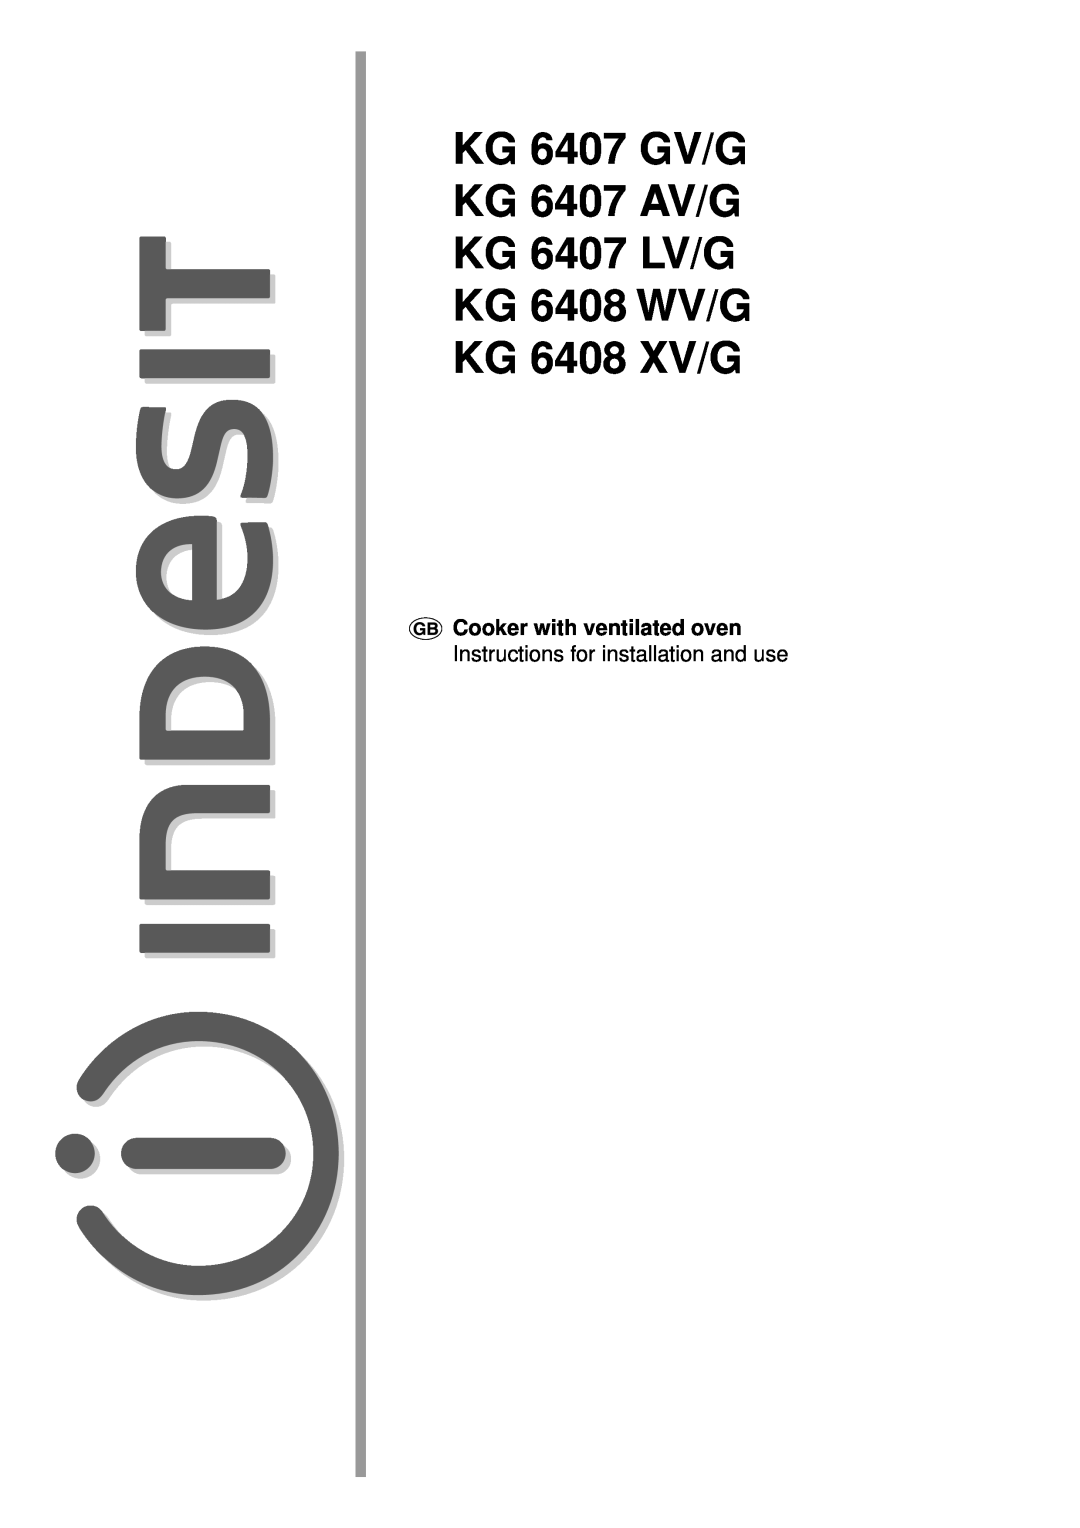 Indesit KG6408 XV/G manual Cooker with ventilated oven, KG 6407 GV/G KG 6407 AV/G KG 6407 LV/G KG 6408 WV/G KG 6408 XV/G 